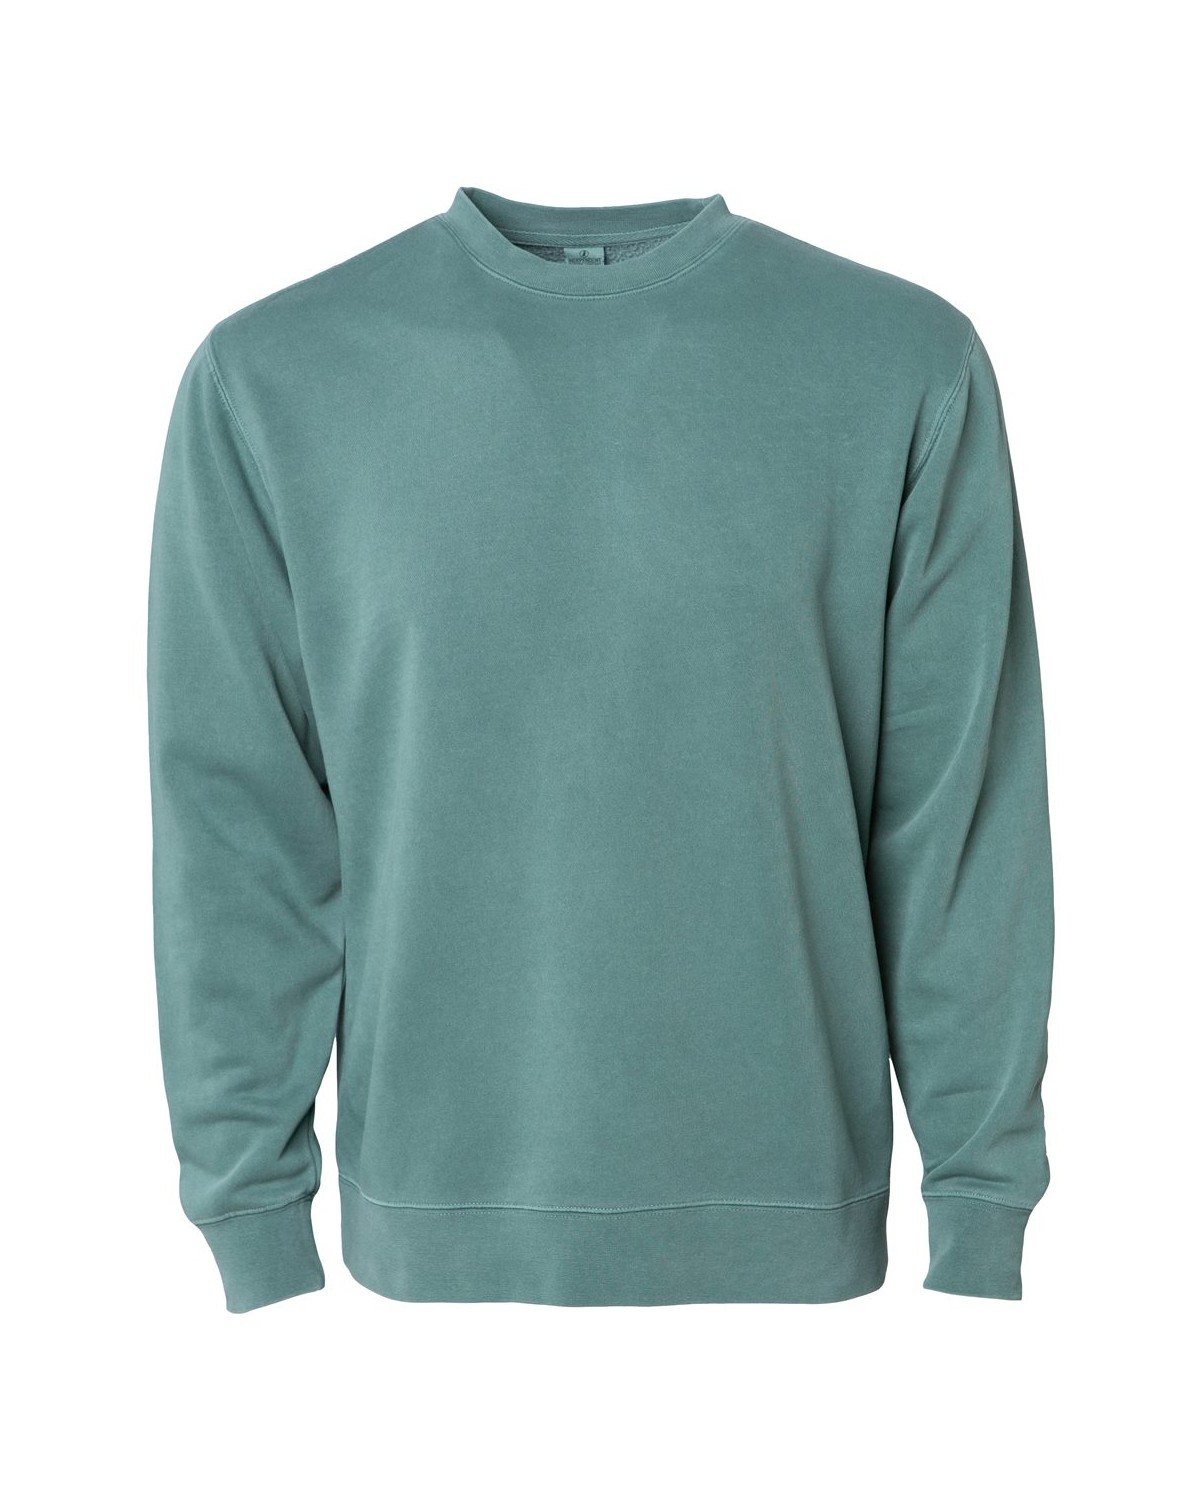 Independent Trading Co. PRM3500 Unisex Midweight Pigment-Dyed Crewneck ...